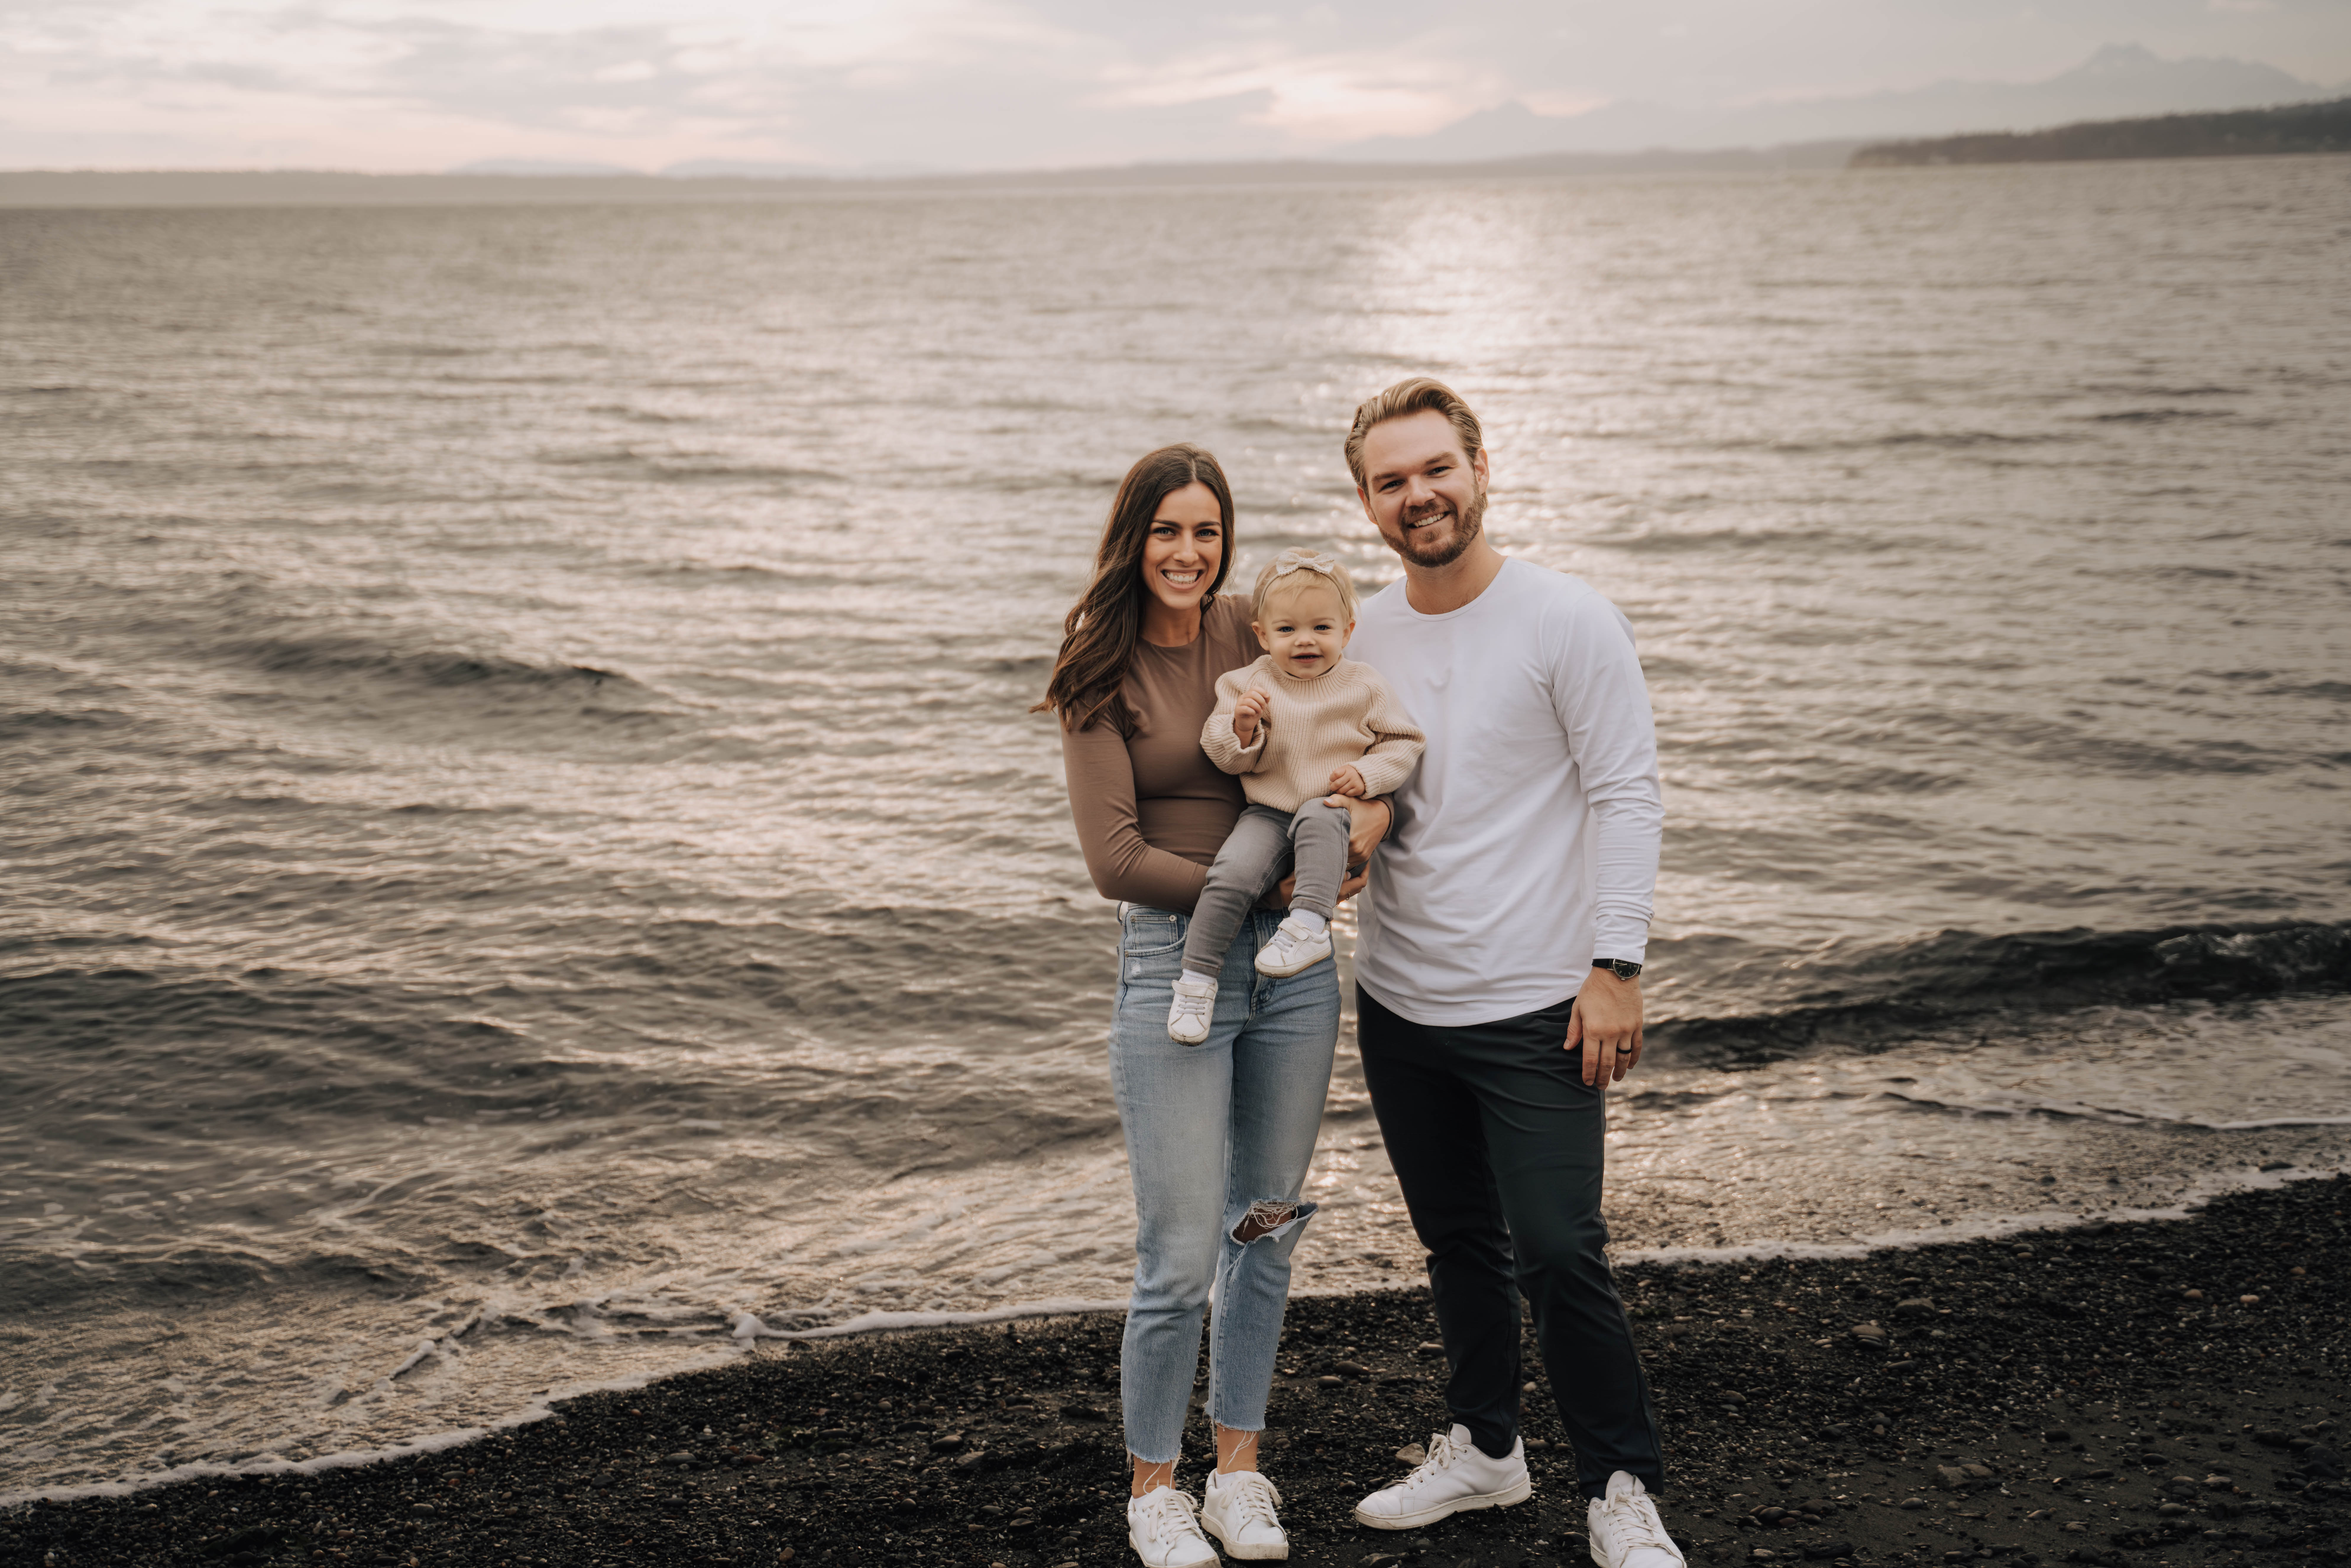 Dexter and his wife Bonnie with their 2-year-old daughter, Avery. The couple met in college at Utah Valley University. Bonnie works at a financial planning firm in Redmond.